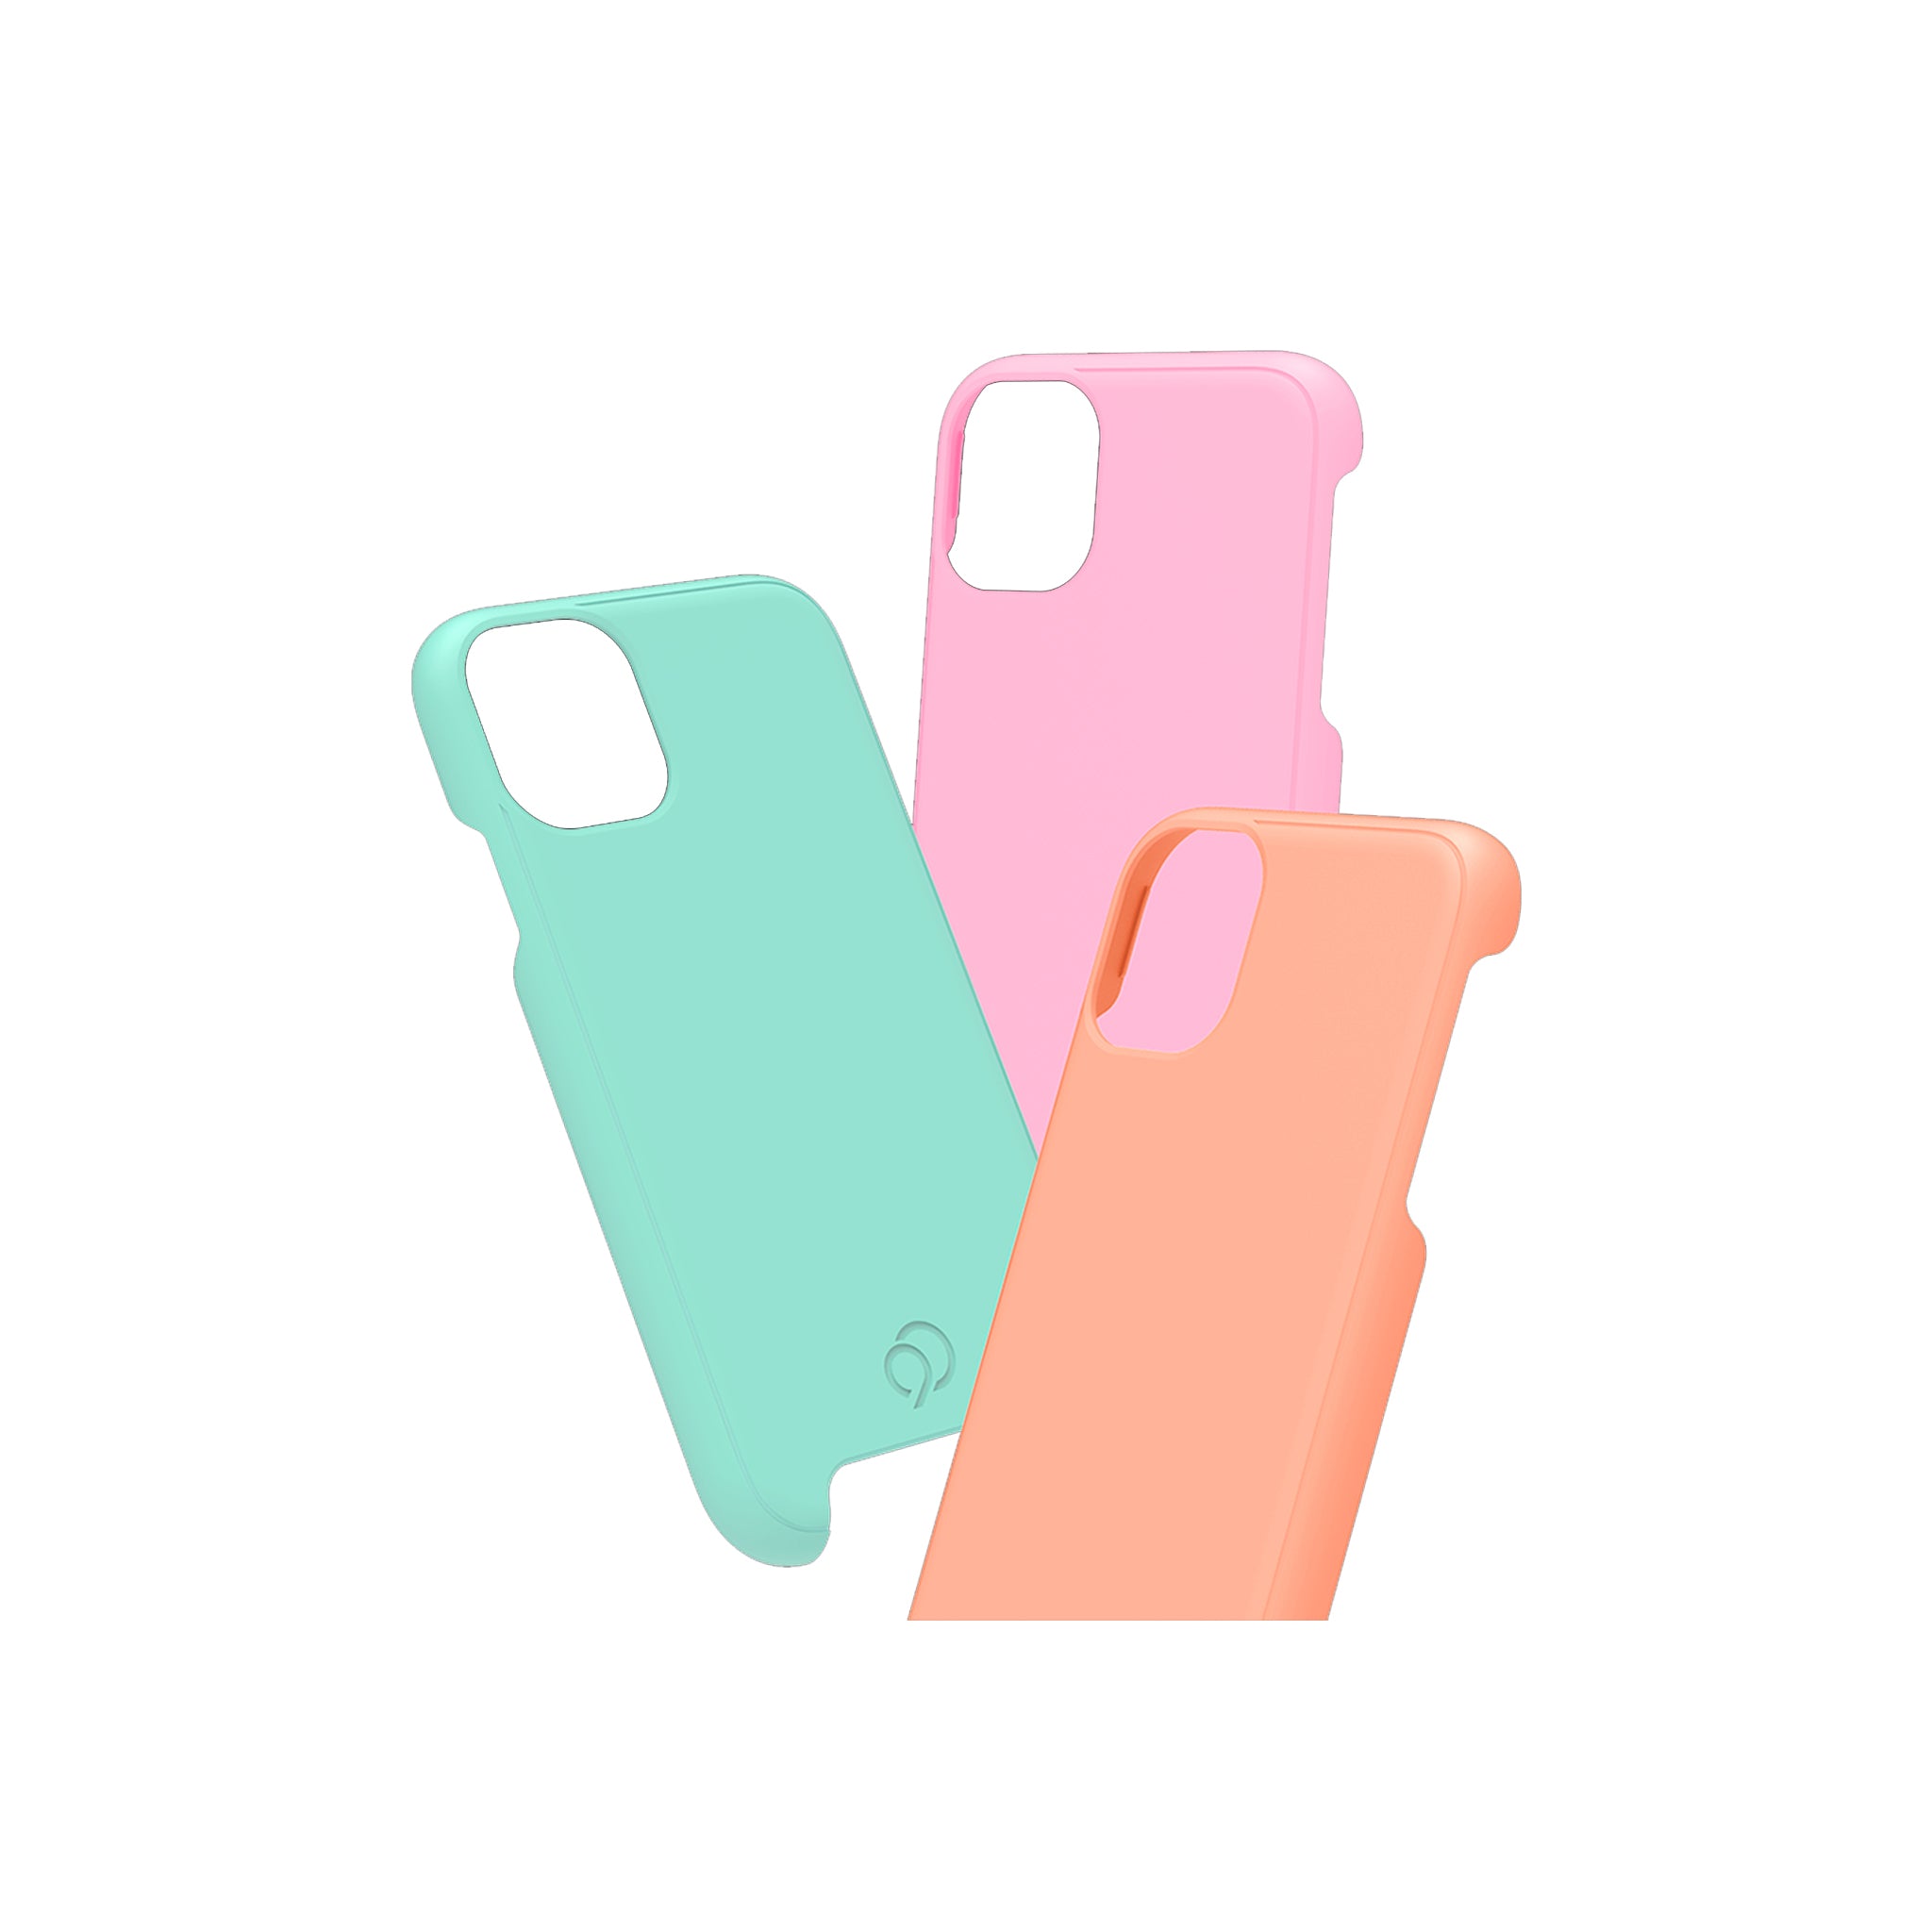 Nimbus9 - Lifestyle Kit Cases For Apple Iphone 11 / Xr - Tropical Collection